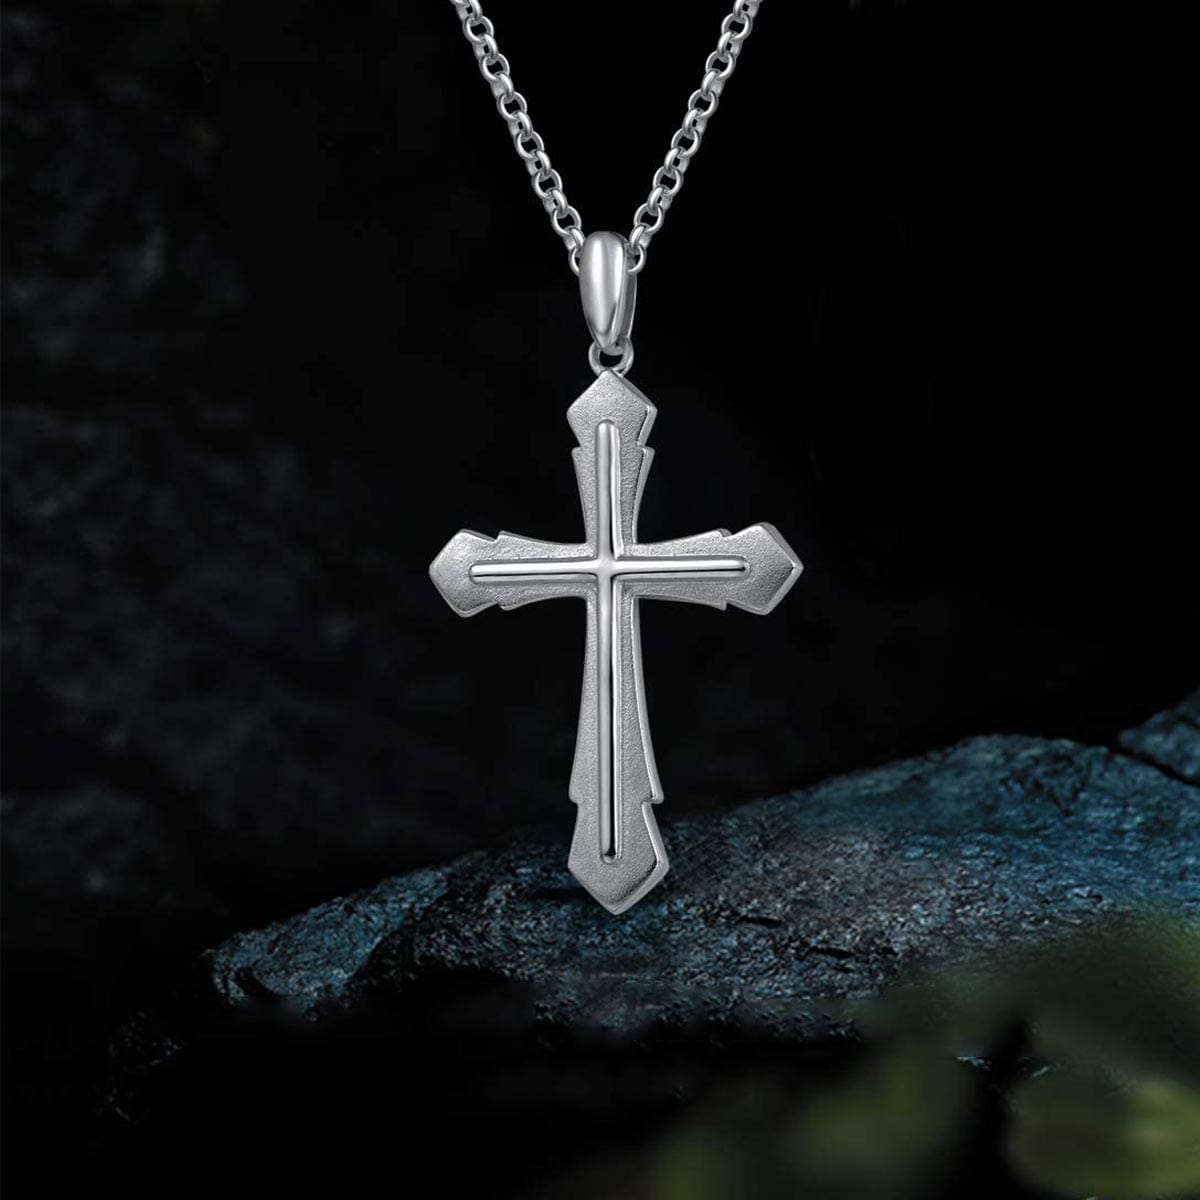 FANCIME Edgy Men's Cross Sterling Silver Necklace Detail